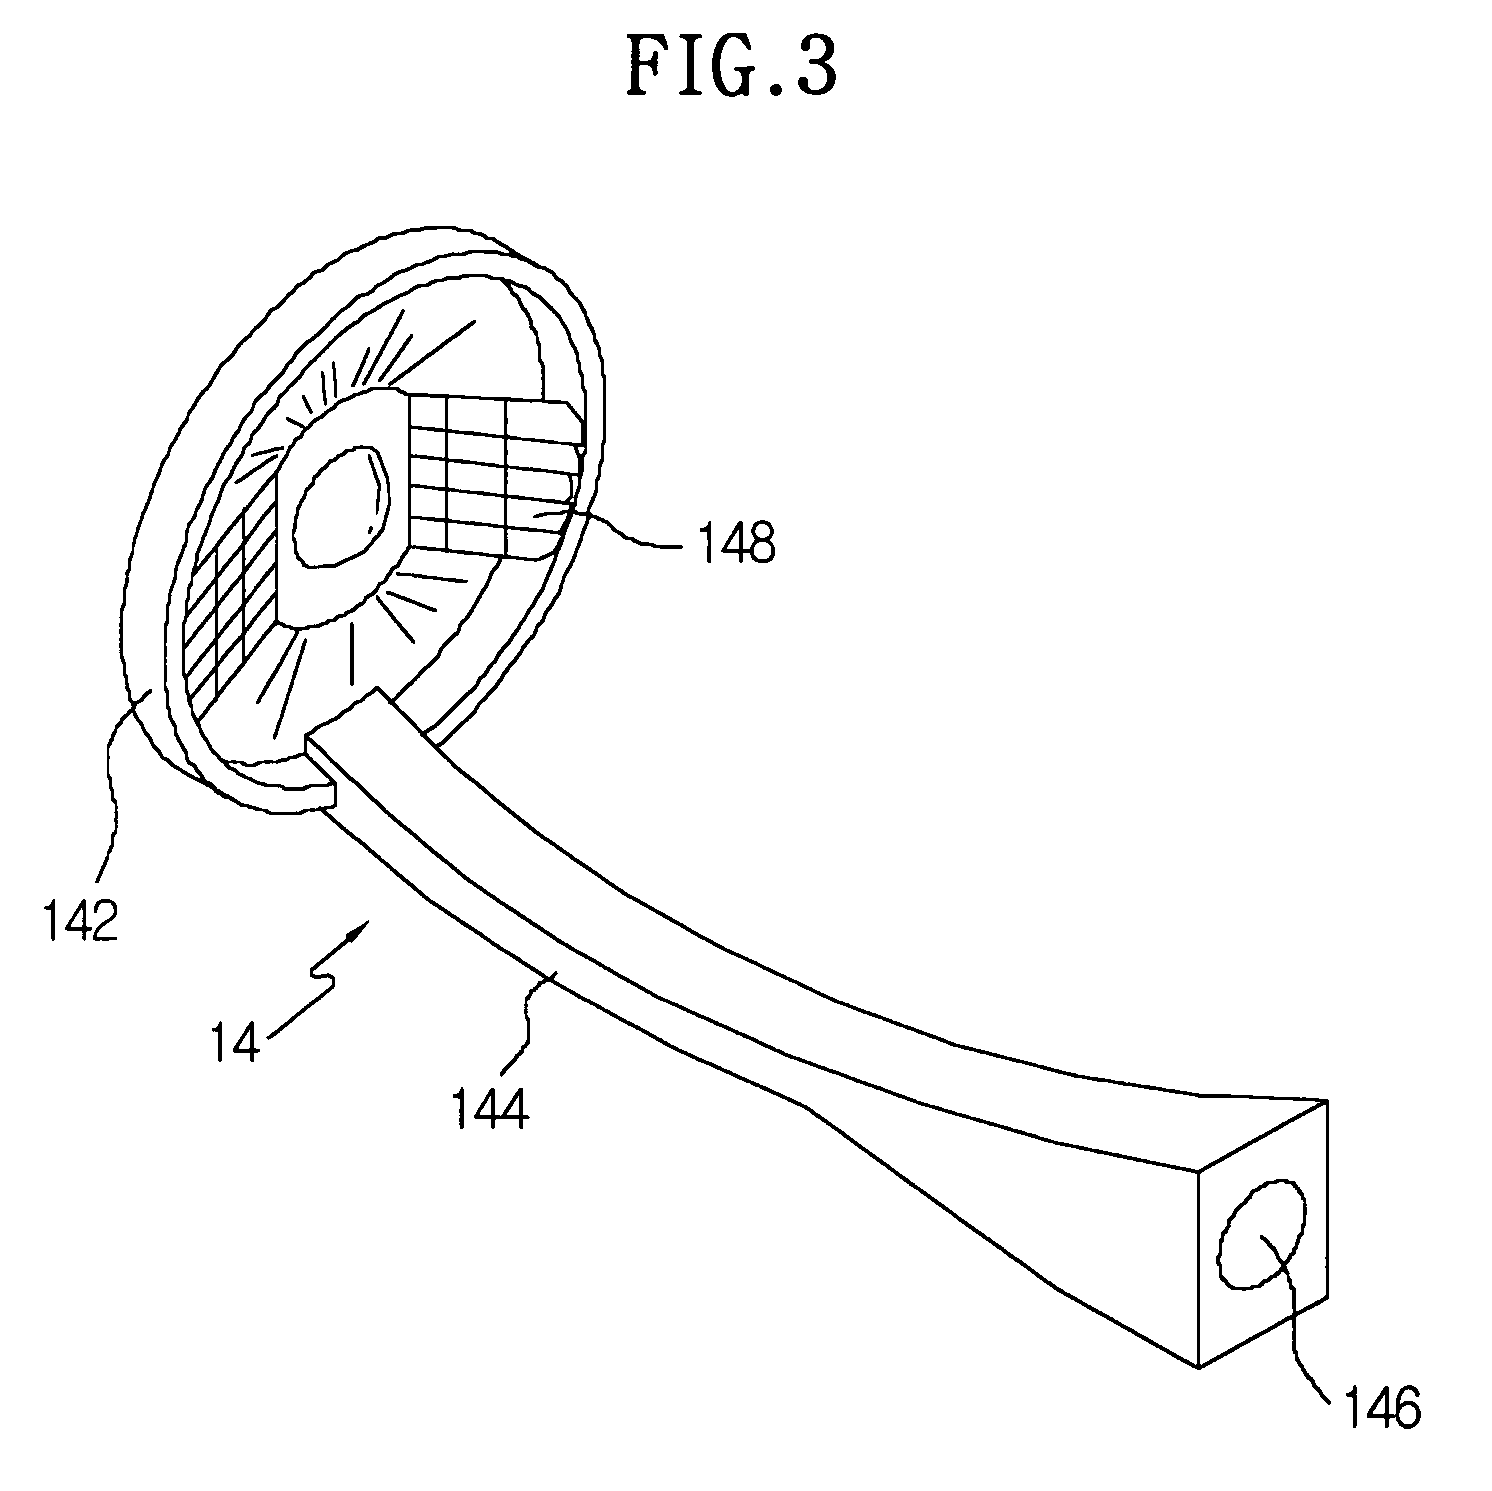 Vehicle lamp with a shield having a double directional illumination structure